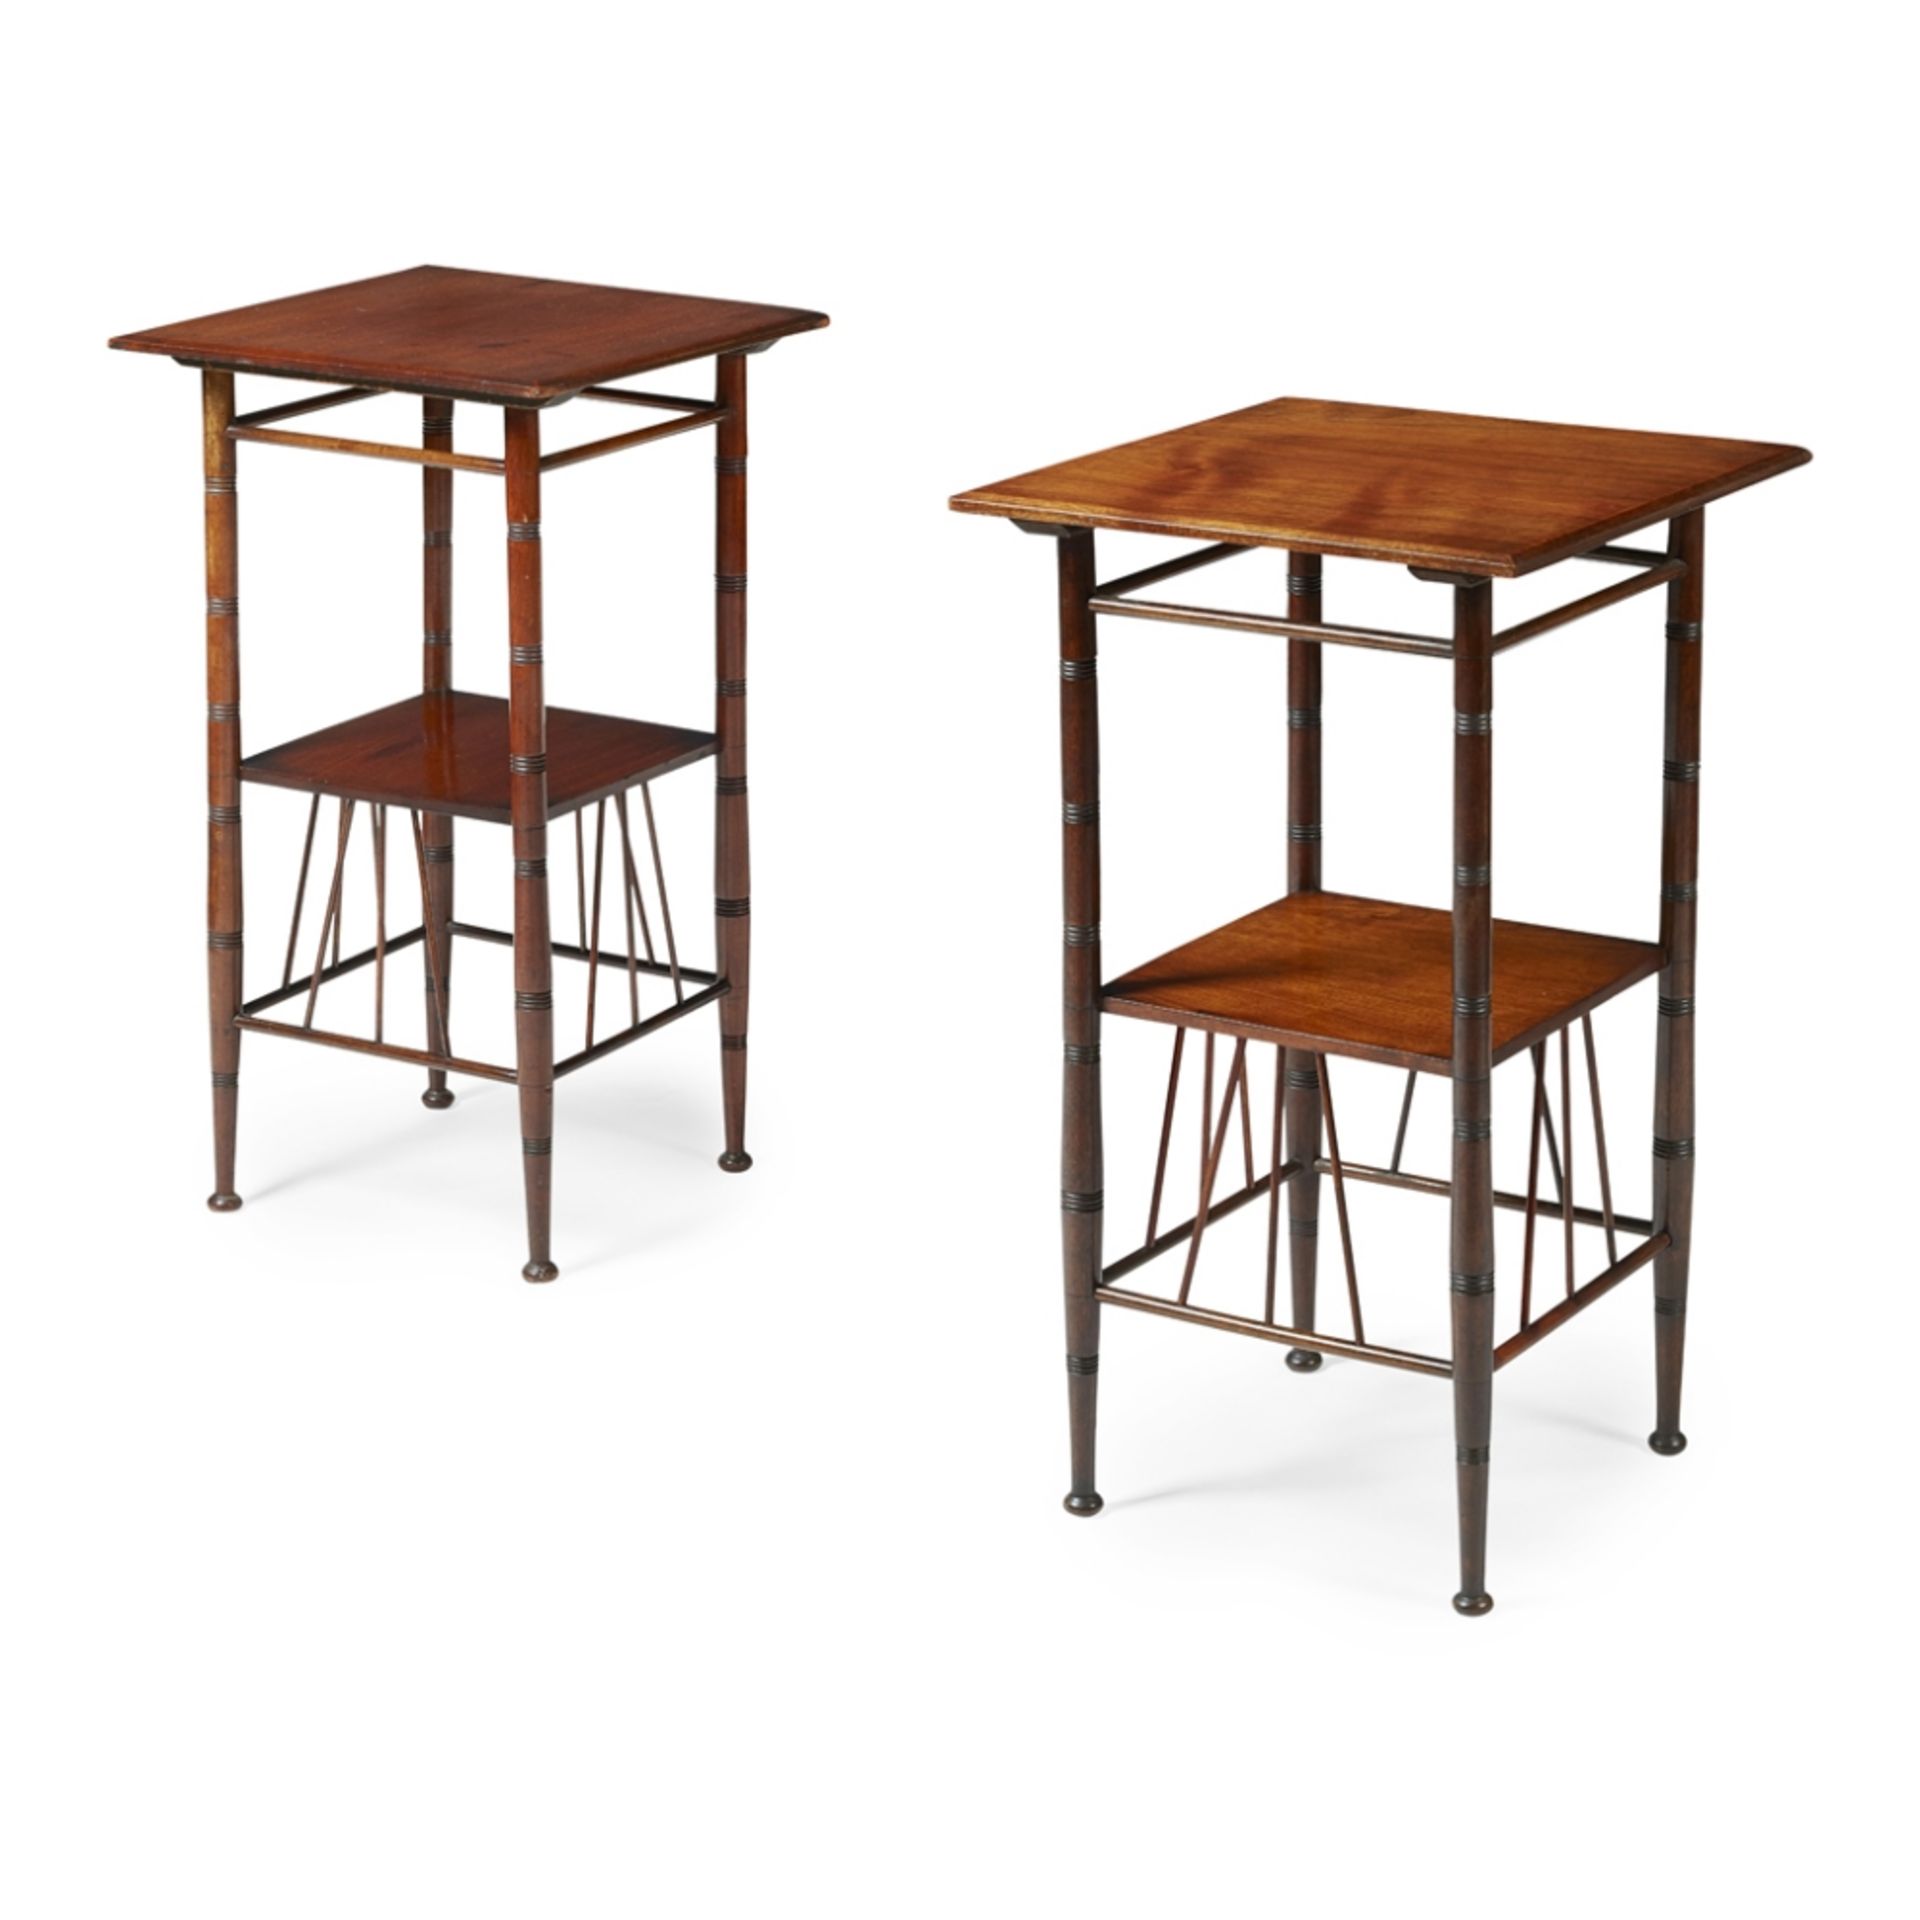 AFTER E. W. GODWIN PAIR OF AESTHETIC MOVEMENT WALNUT OCCASIONAL TABLES, CIRCA 1890 each with